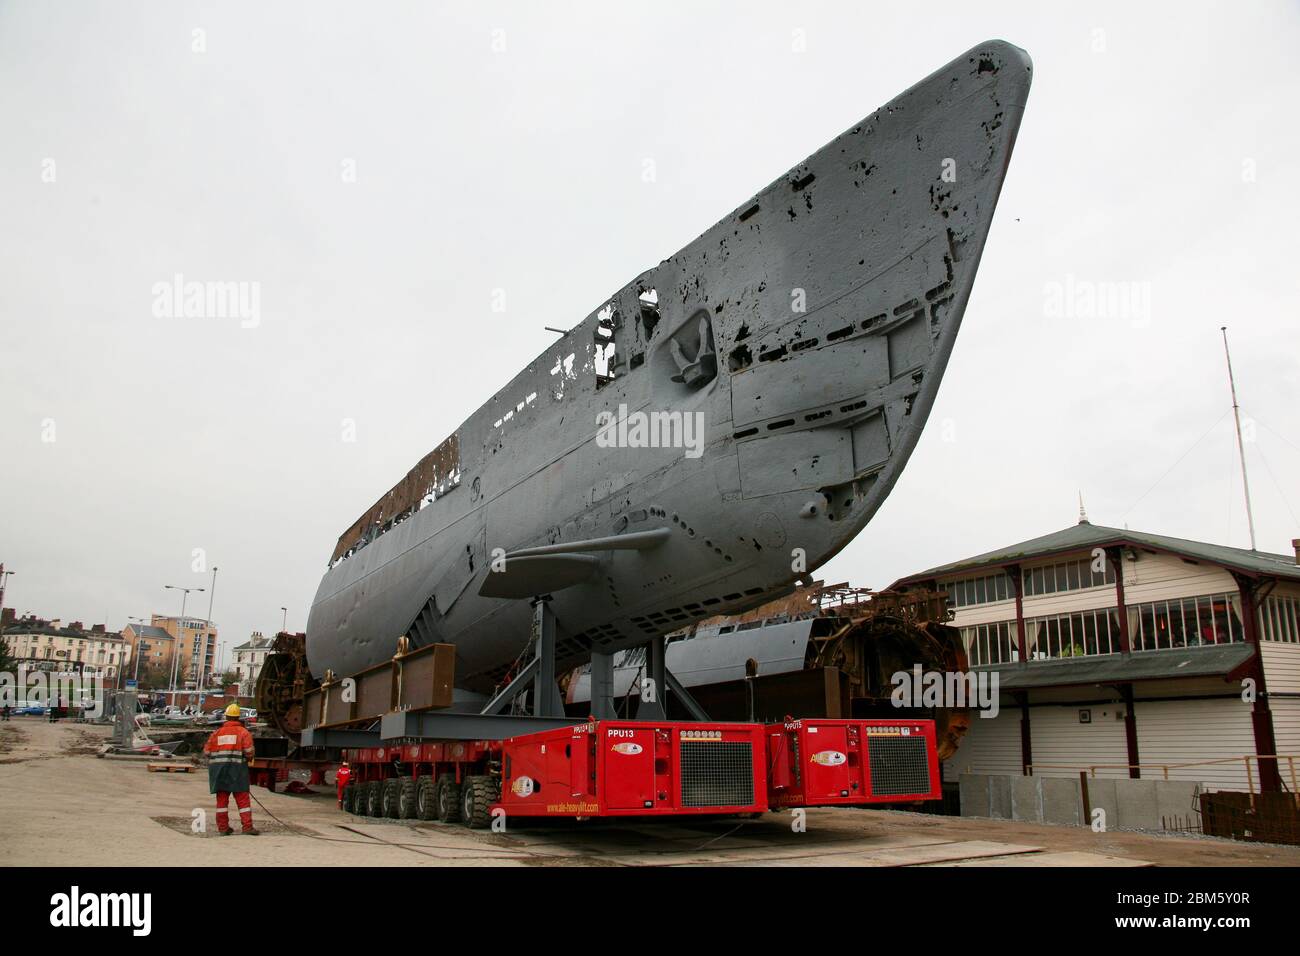 FILE: 7th May 2020. Photo taken: Birkenhead United Kingdom 15th March 2008 Bow Section and Central Section of U 534 having been brought ashore at the Woodside Ferry Terminal Credit: Photographing North/Alamy Live News Stock Photo